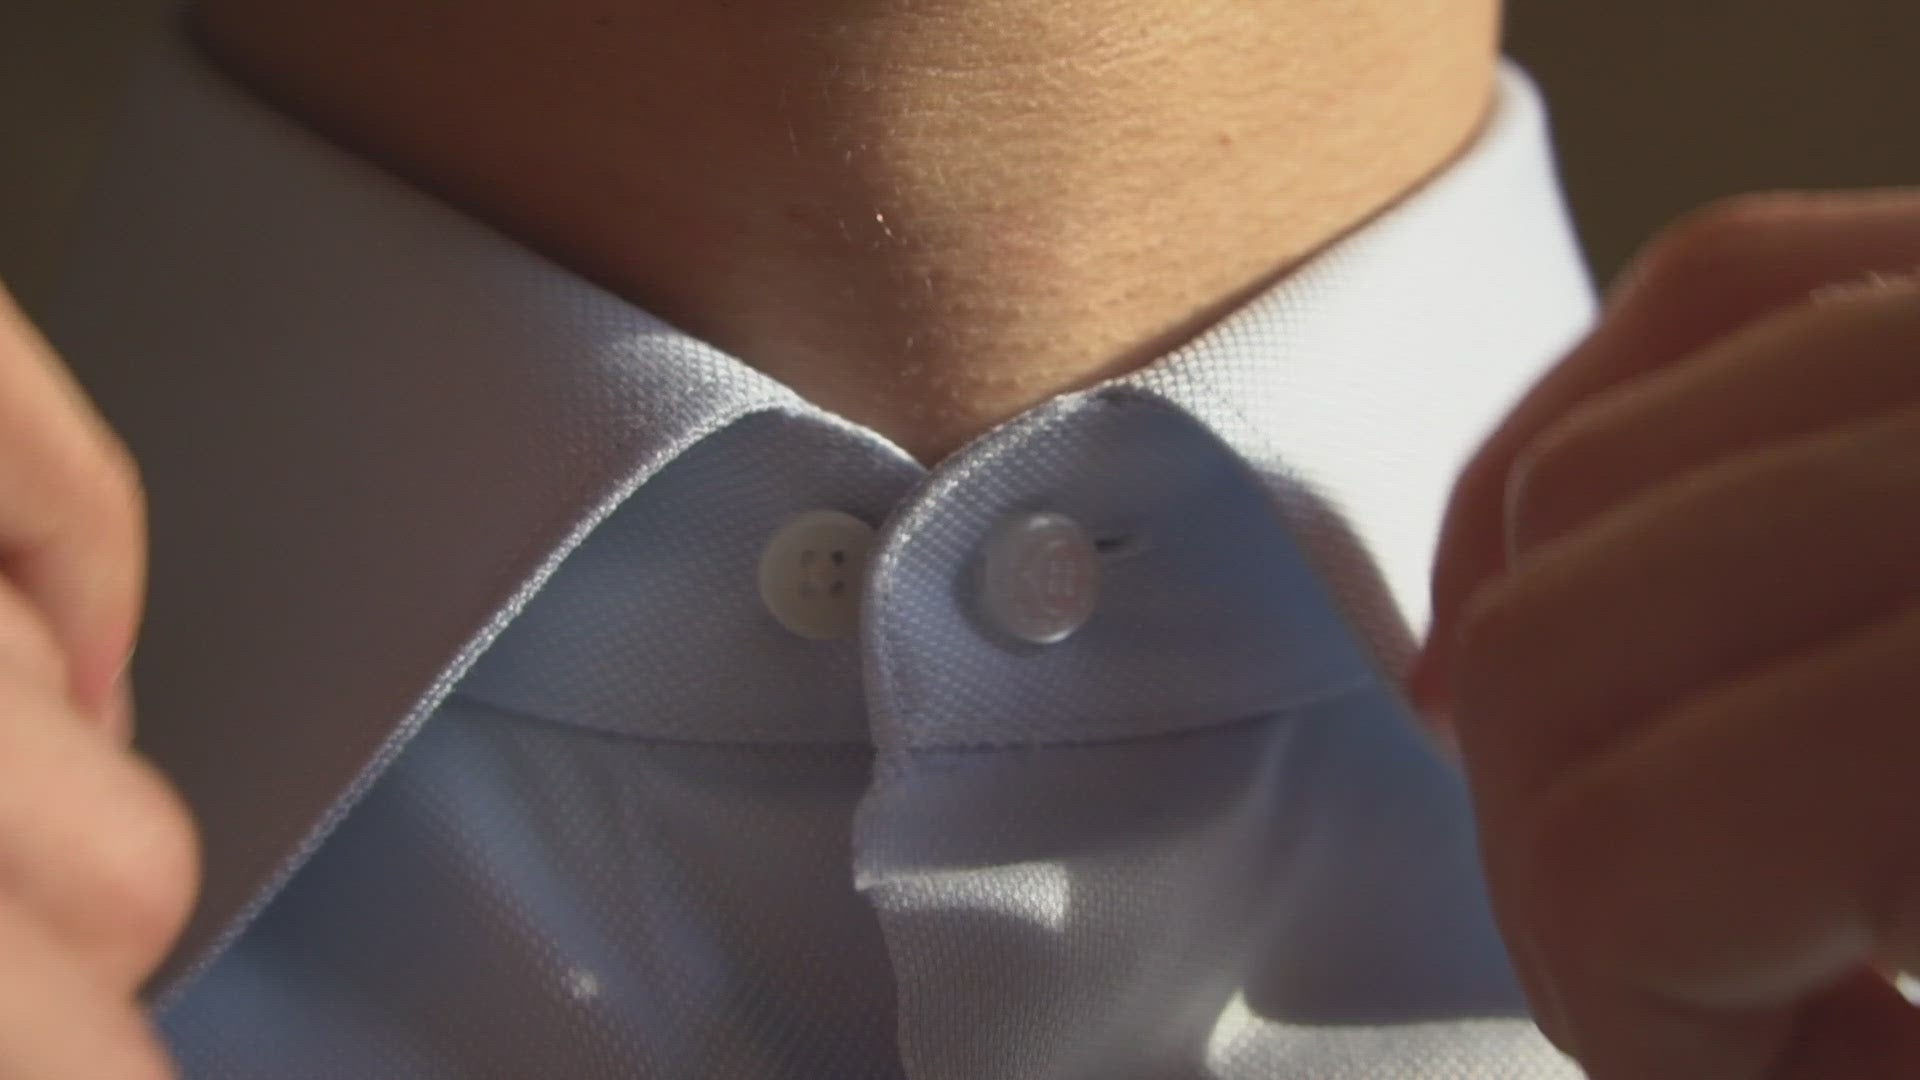 Video presentation of a man showing how to use a shirt collar extender